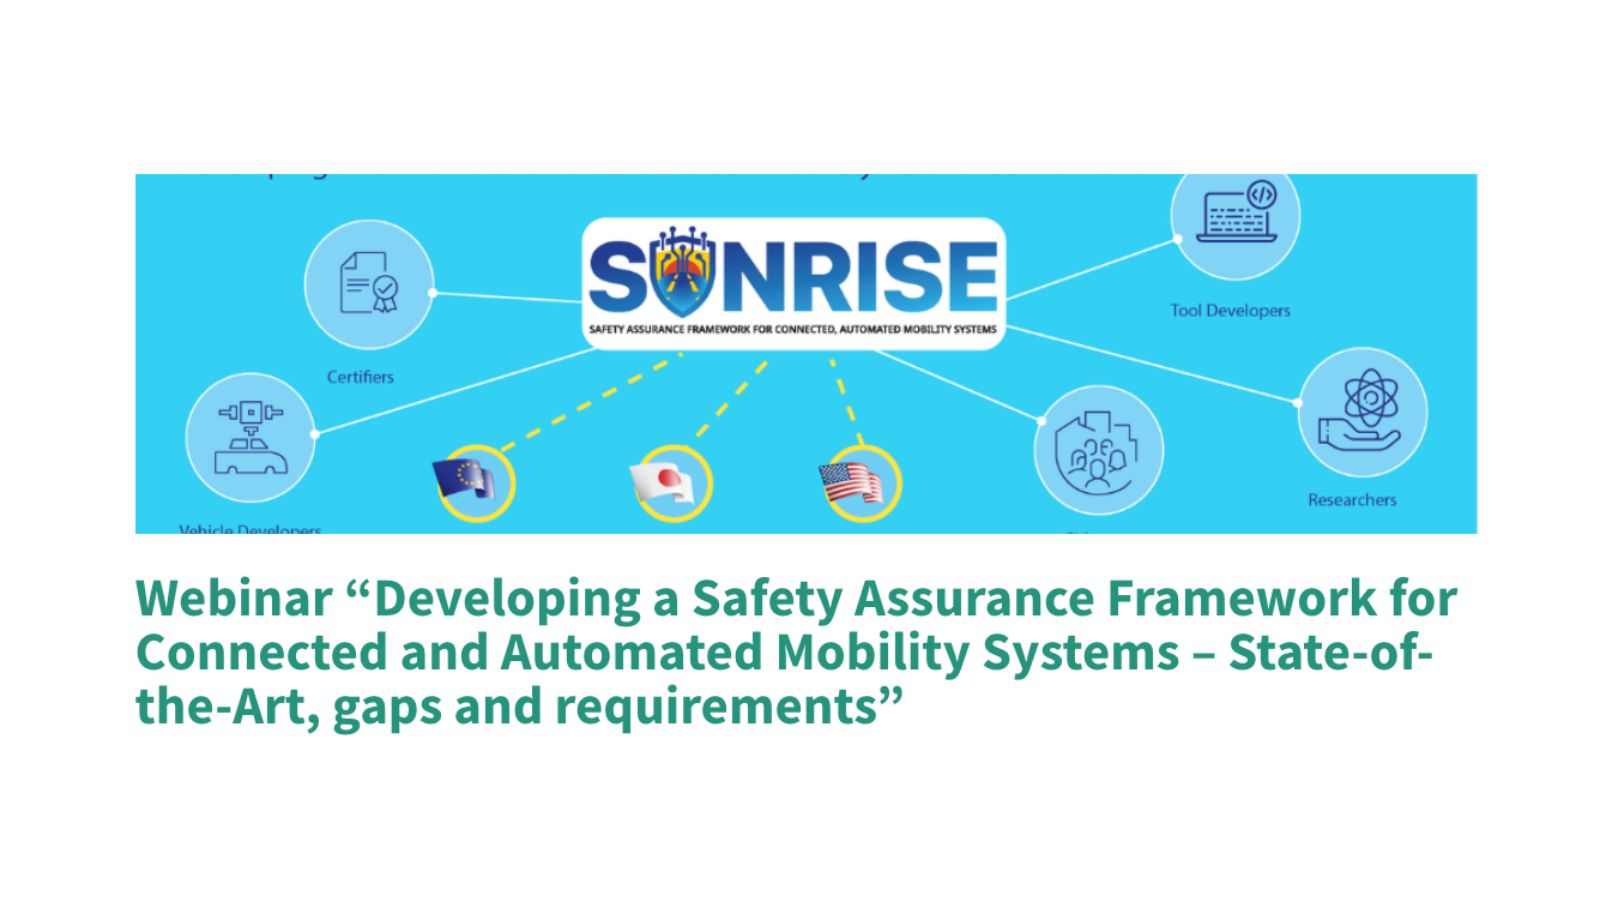 SUNRISE Project Inaugural Webinar – State-of-the-Art, gaps and requirements in developing a Safety Assurance Framework for CAM systems